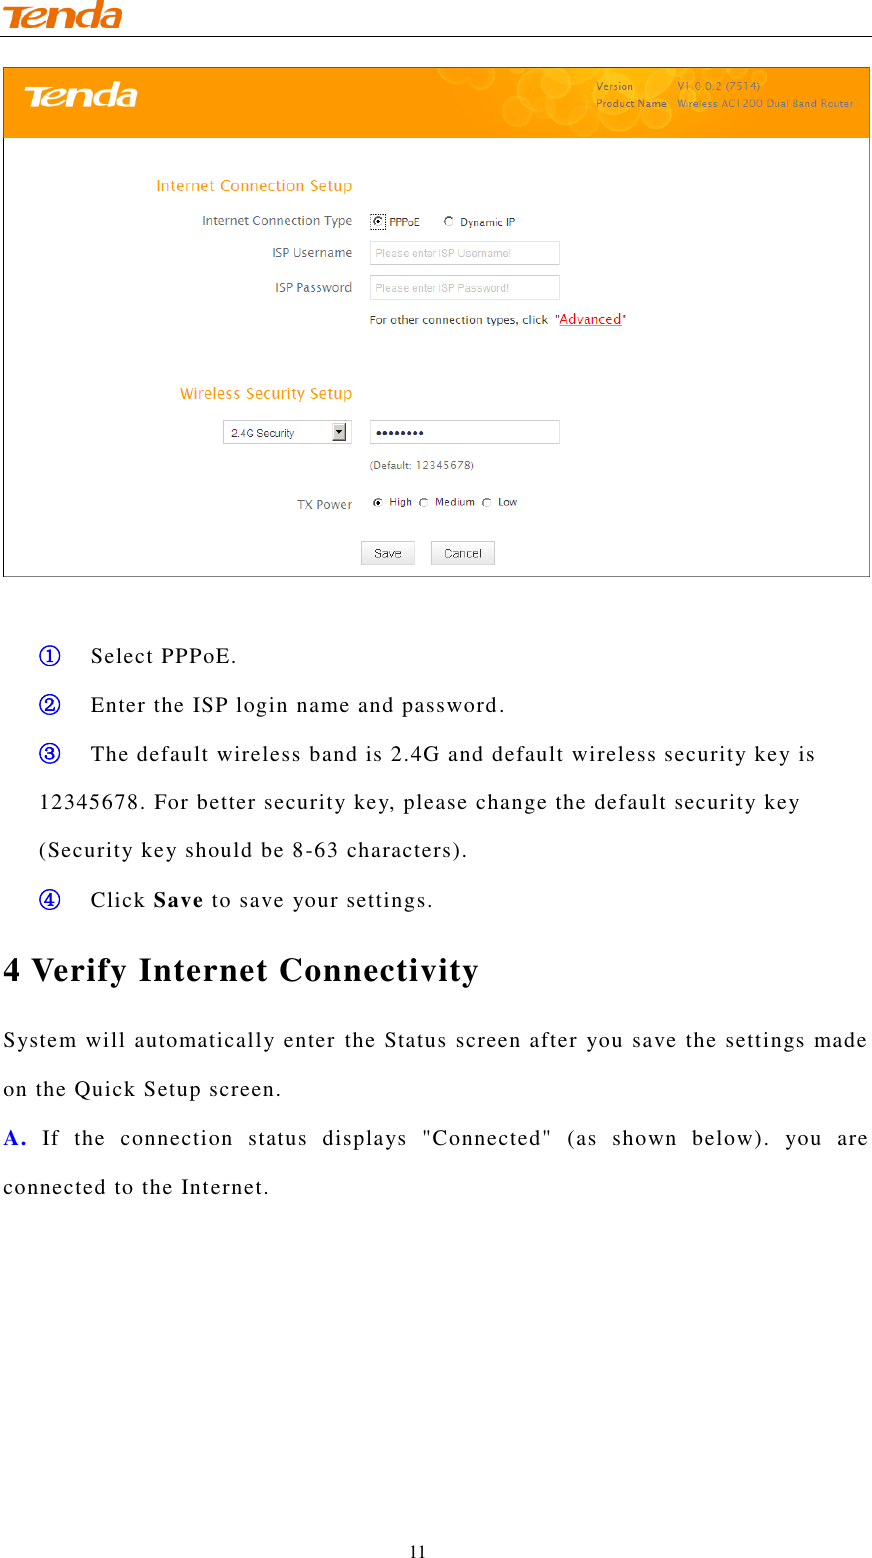                                    11   ① Select PPPoE. ② Enter the ISP login name and password. ③ The default wireless band is 2.4G and default wireless security key is 12345678. For better security key, please change the default security key (Security key should be 8-63 characters). ④ Click Save to save your settings. 4 Verify Internet Connectivity System will automatically enter the Status screen after you save the settings made on the Quick Setup screen. A.  If  the  connection  status  displays  &quot;Connected&quot;  (as  shown  below).  you  are connected to the Internet.  